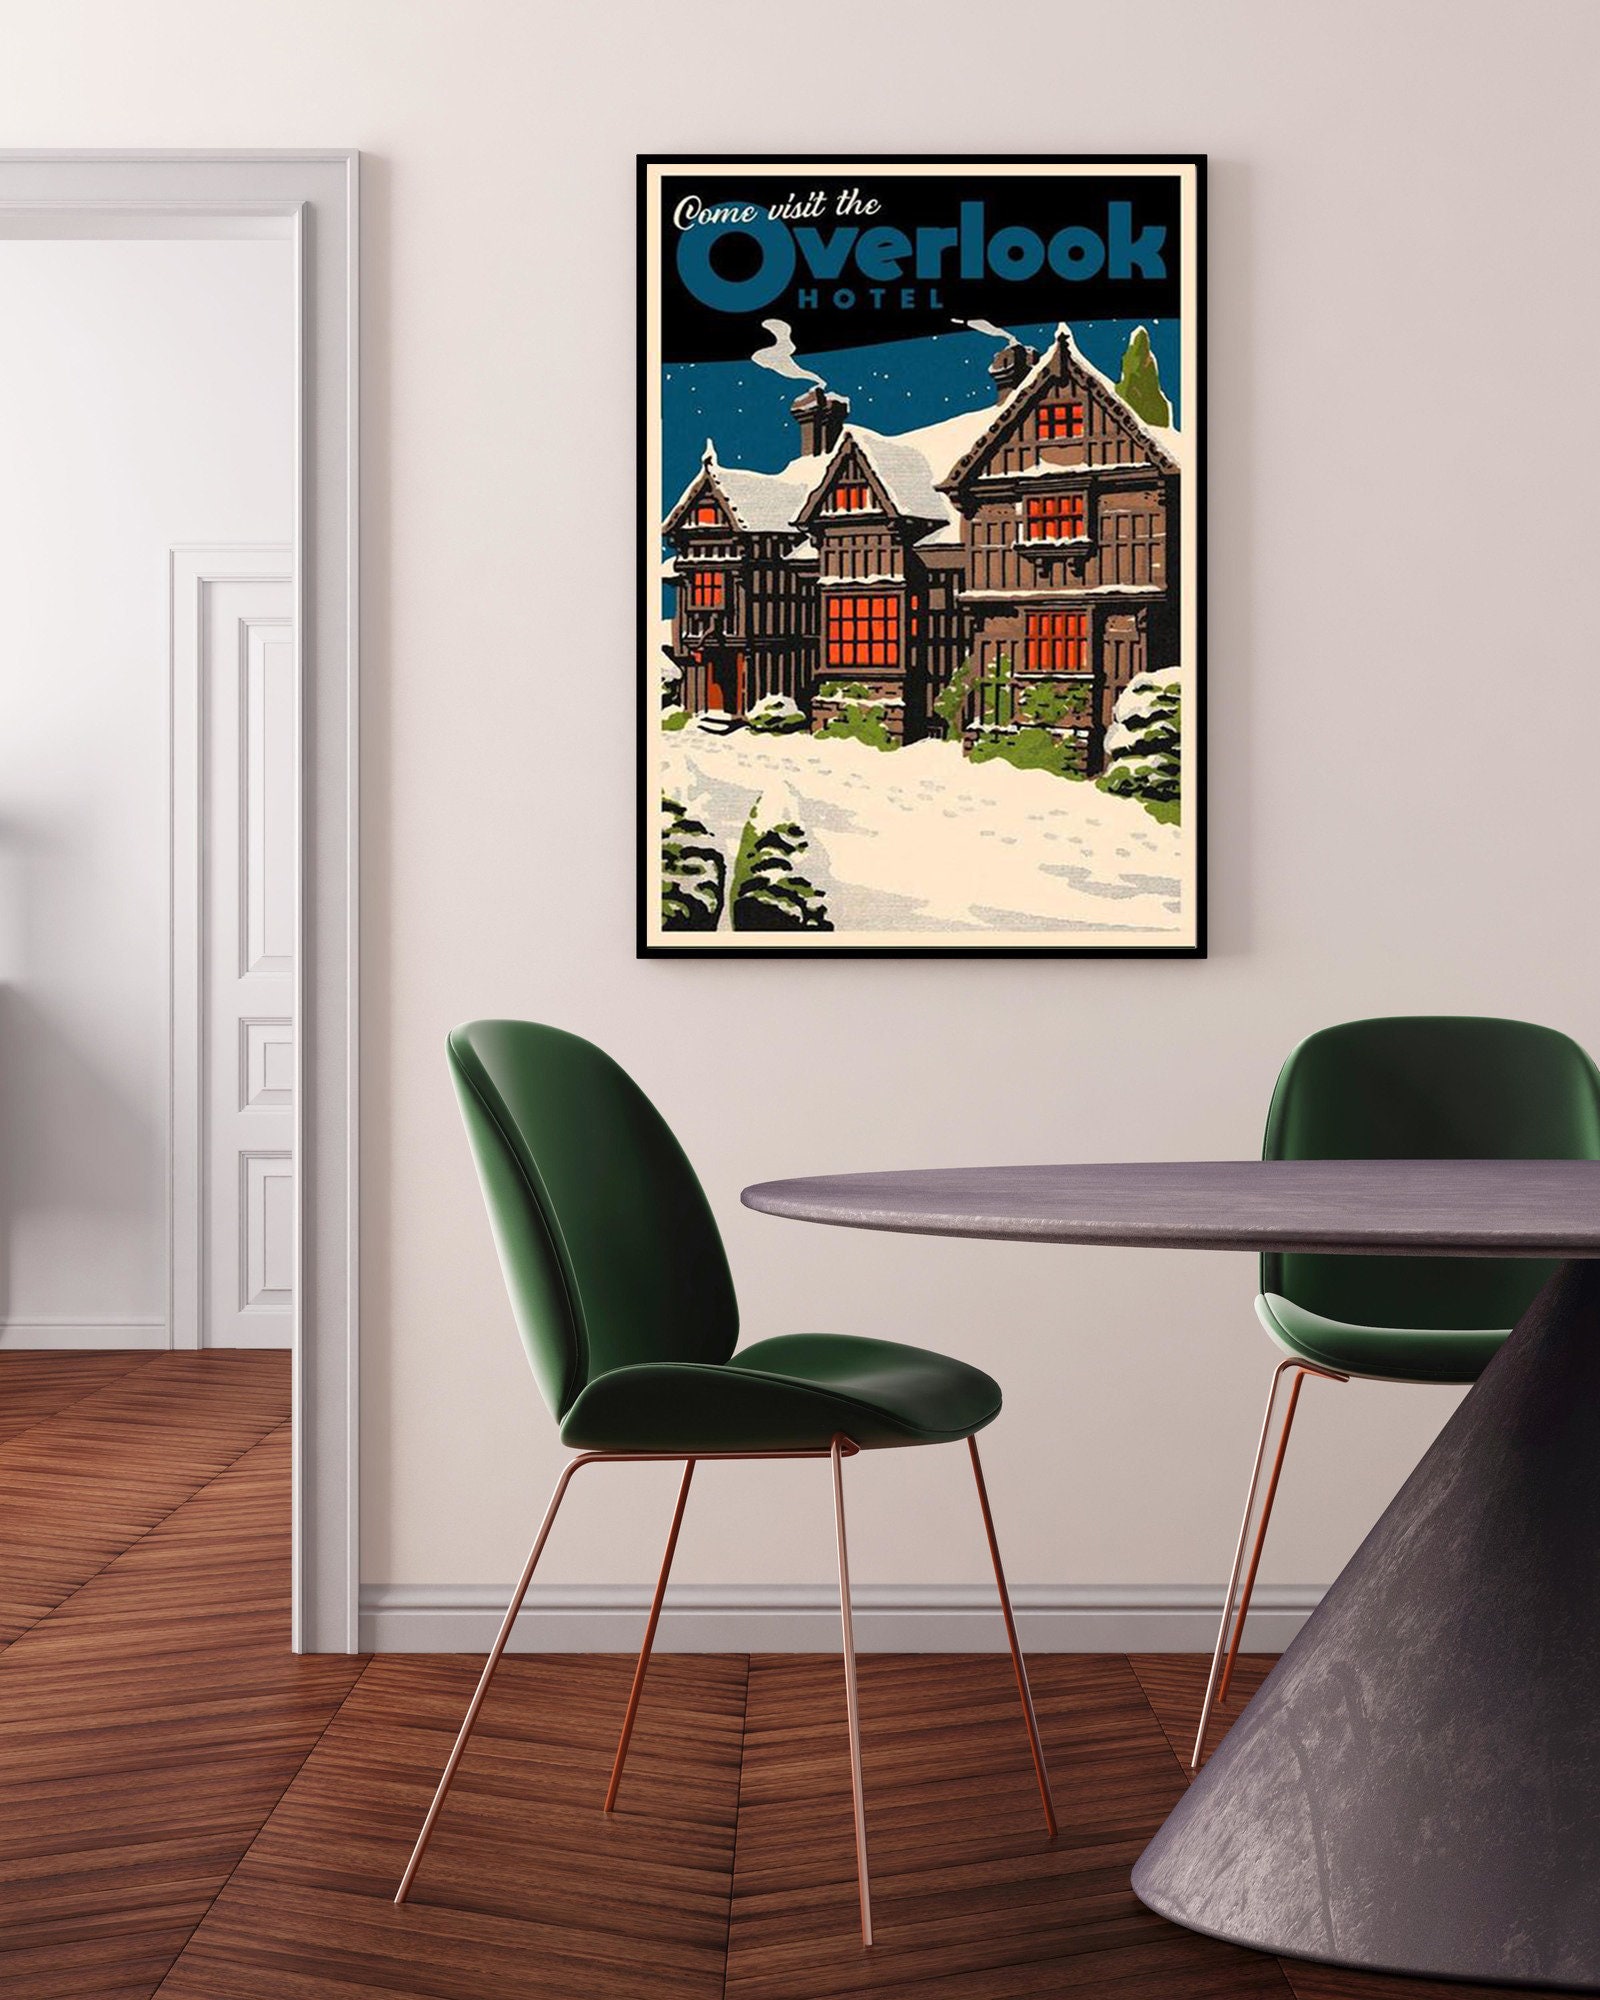 Come Visit The Overlook Hotel Poster | Etsy